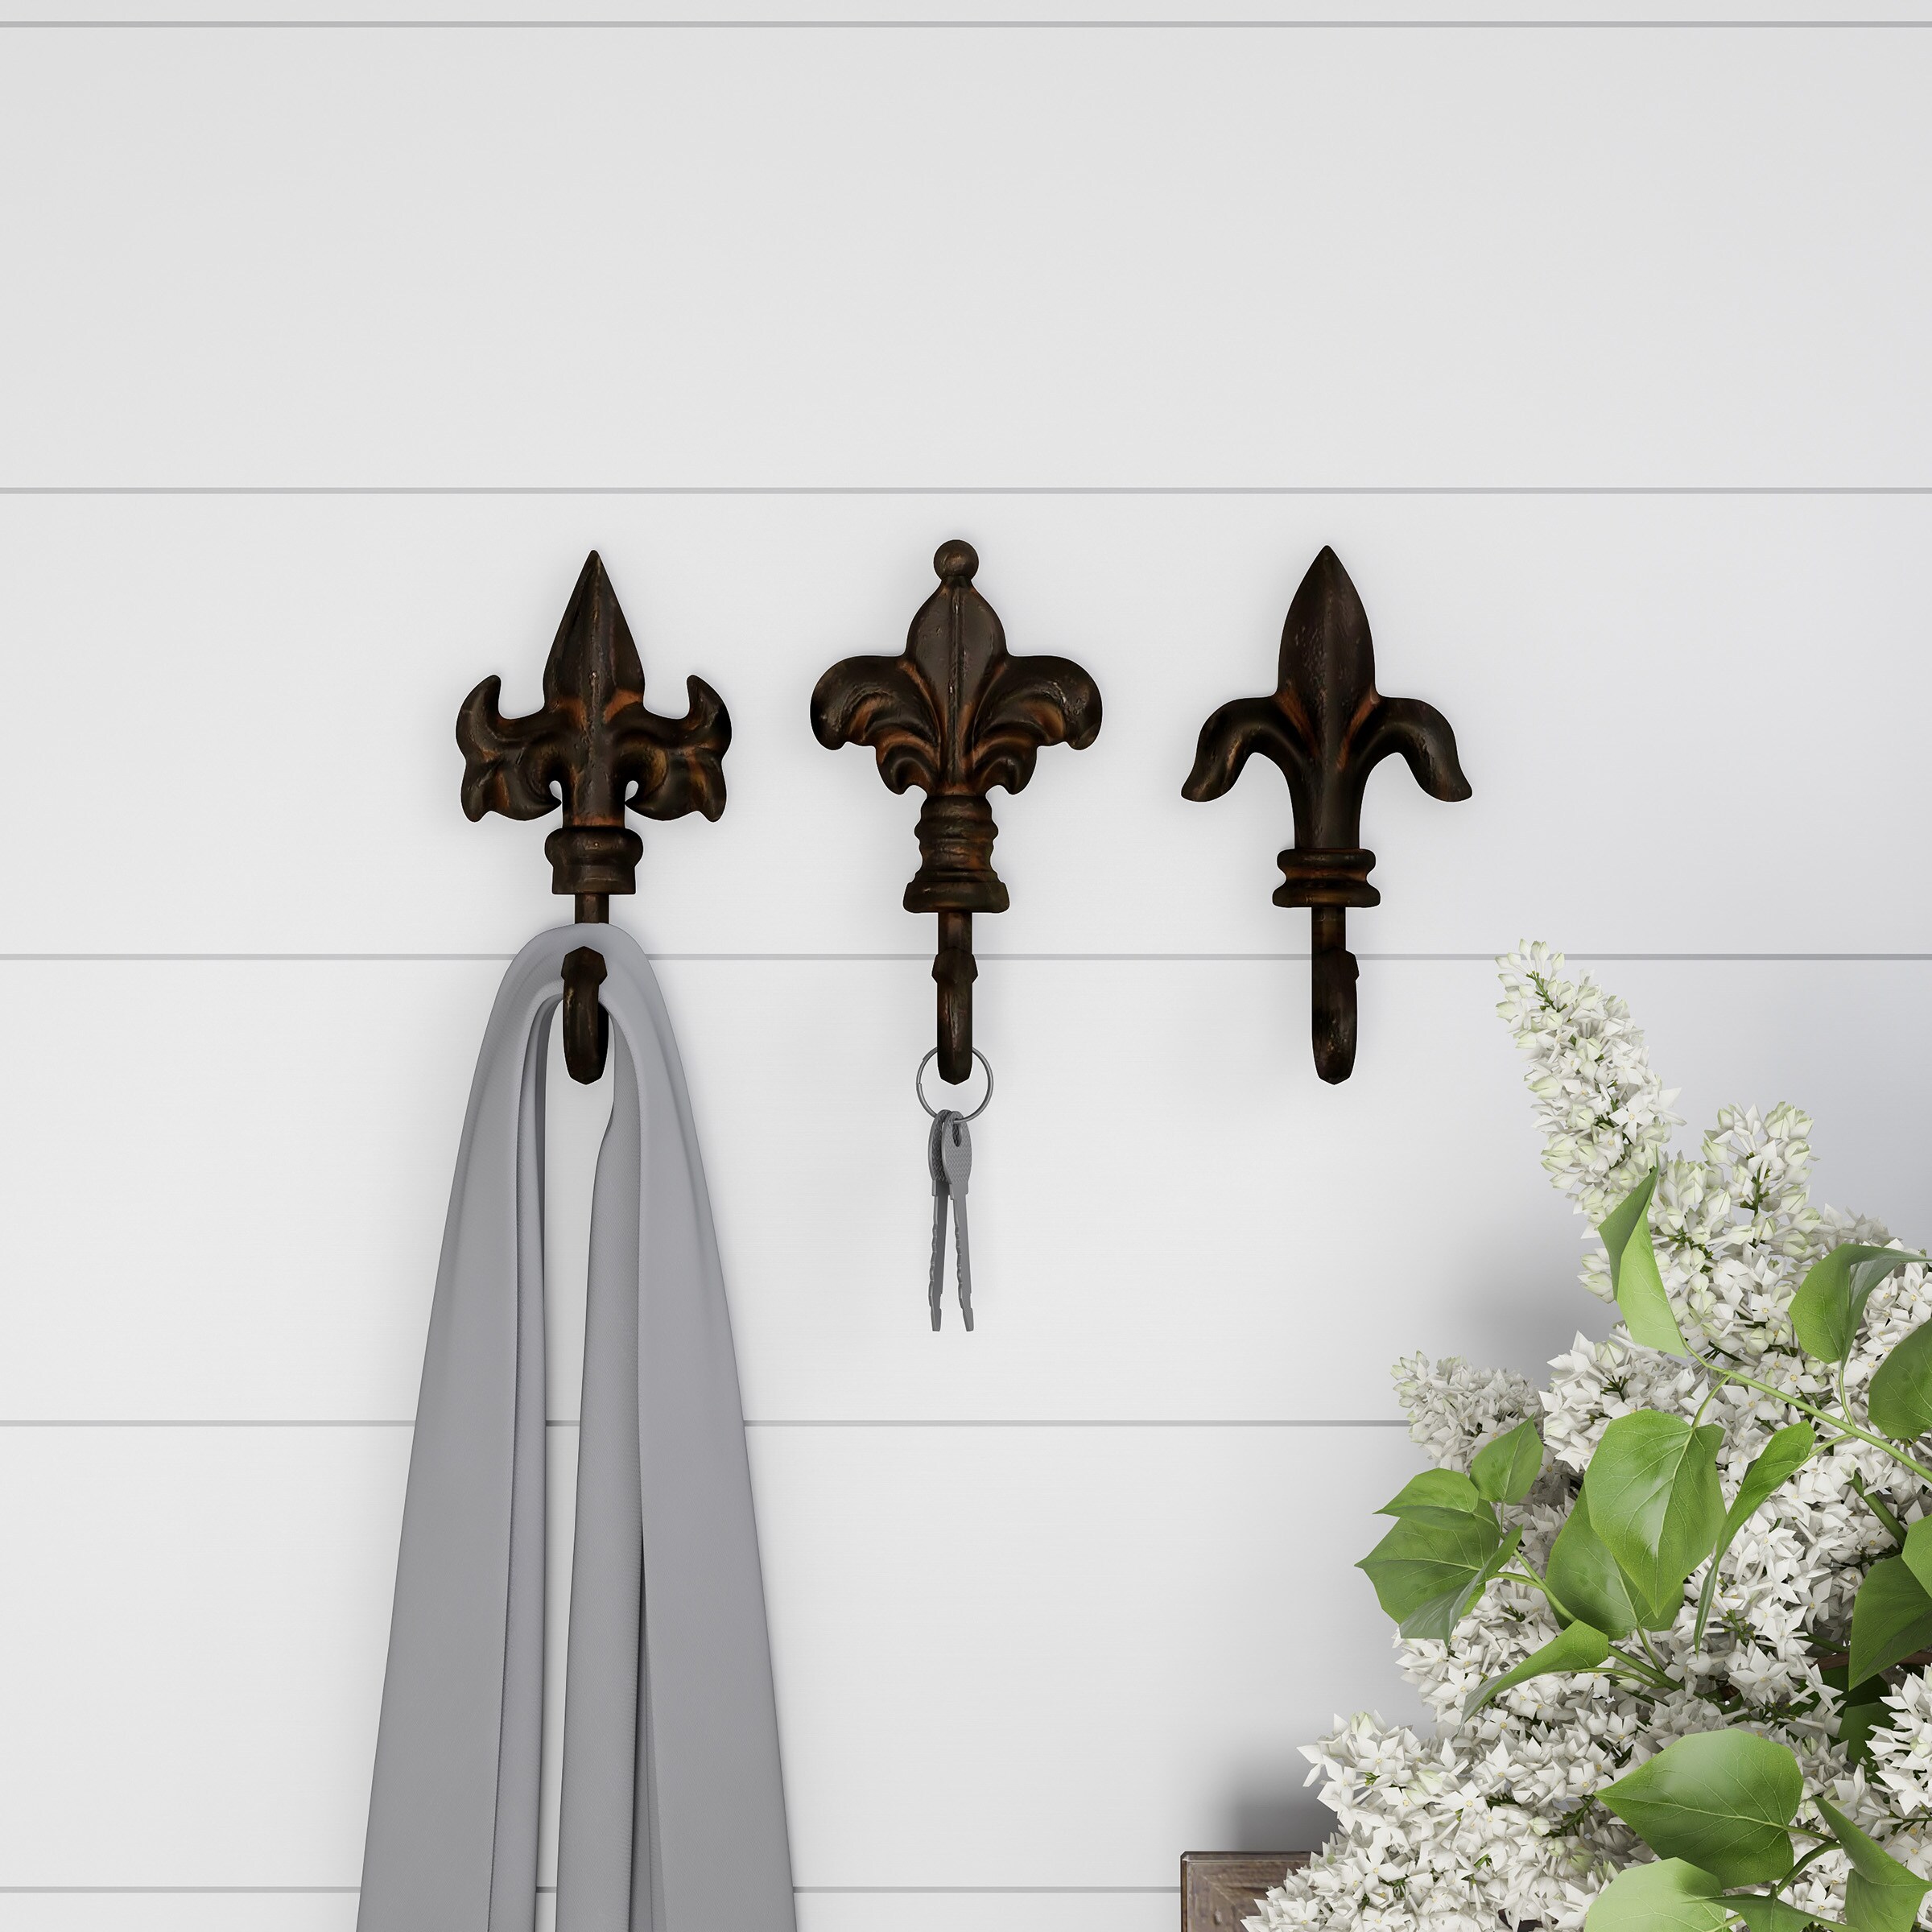 Comfify Set of 3 Cast Iron Fleur De Lis Double Wall Hooks/Hangers with Screws and Anchors CA-1504-30-BR Decorative Wall Mounted Coat Hook Rustic Cast Iron 